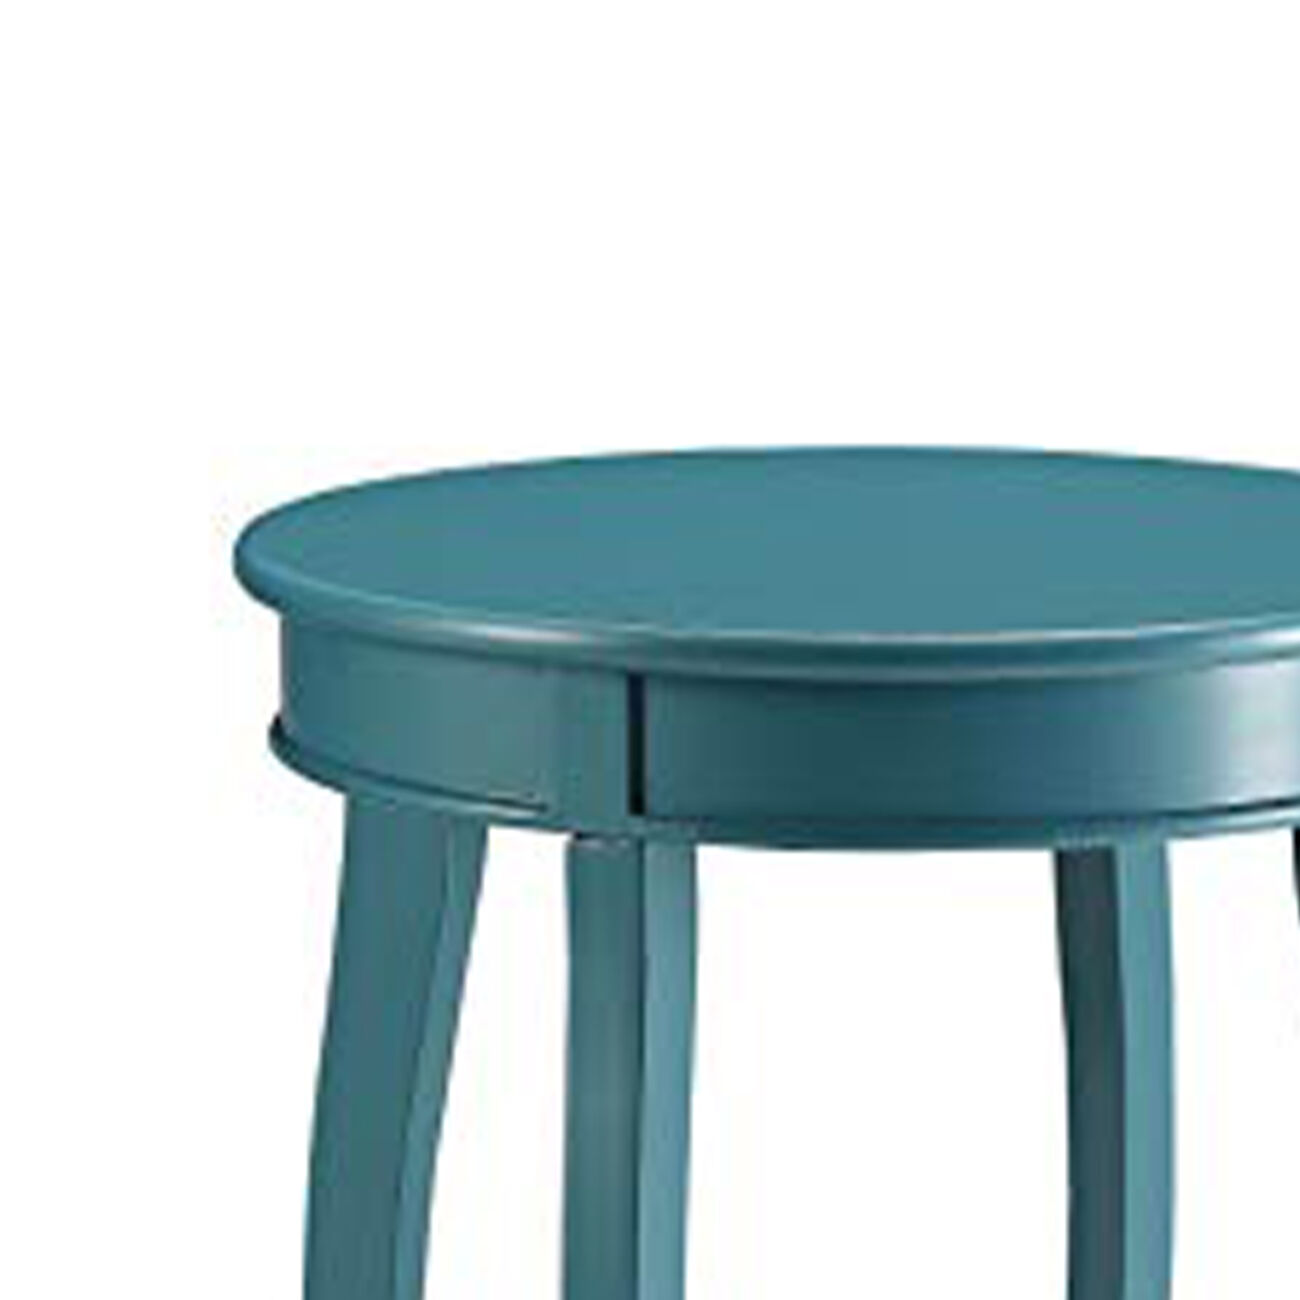 Affiable Side Table, Teal Blue